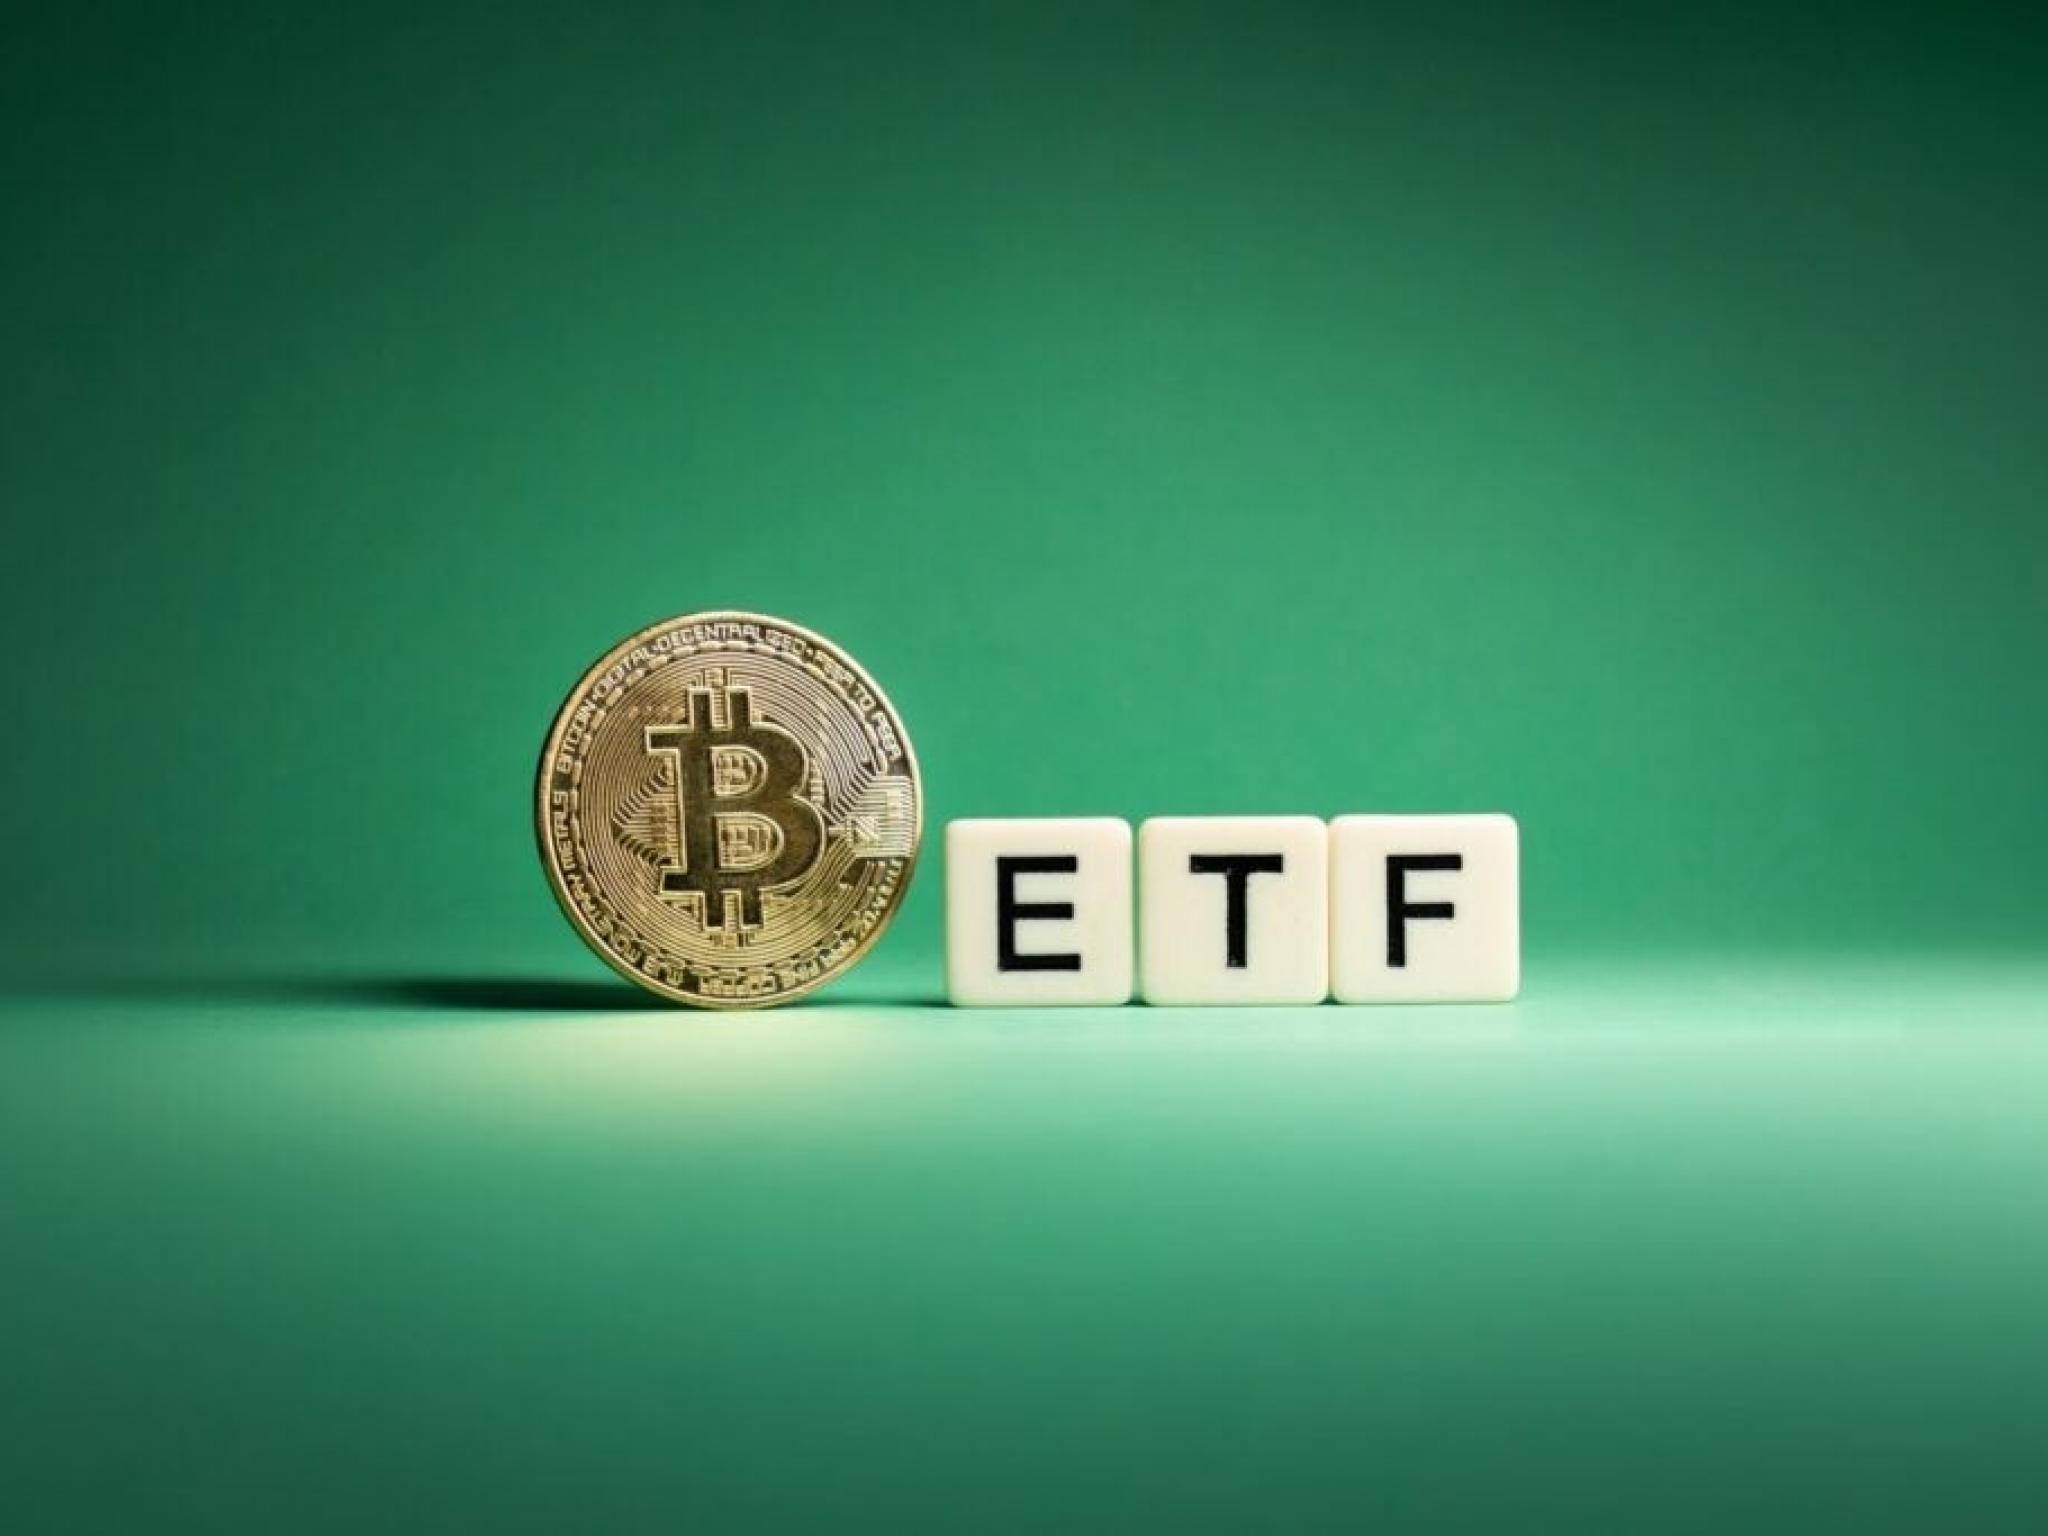  bitcoin-ethereum-etfs-saw-528m-net-outflows-last-week-as-btc-plunges-to-51000 